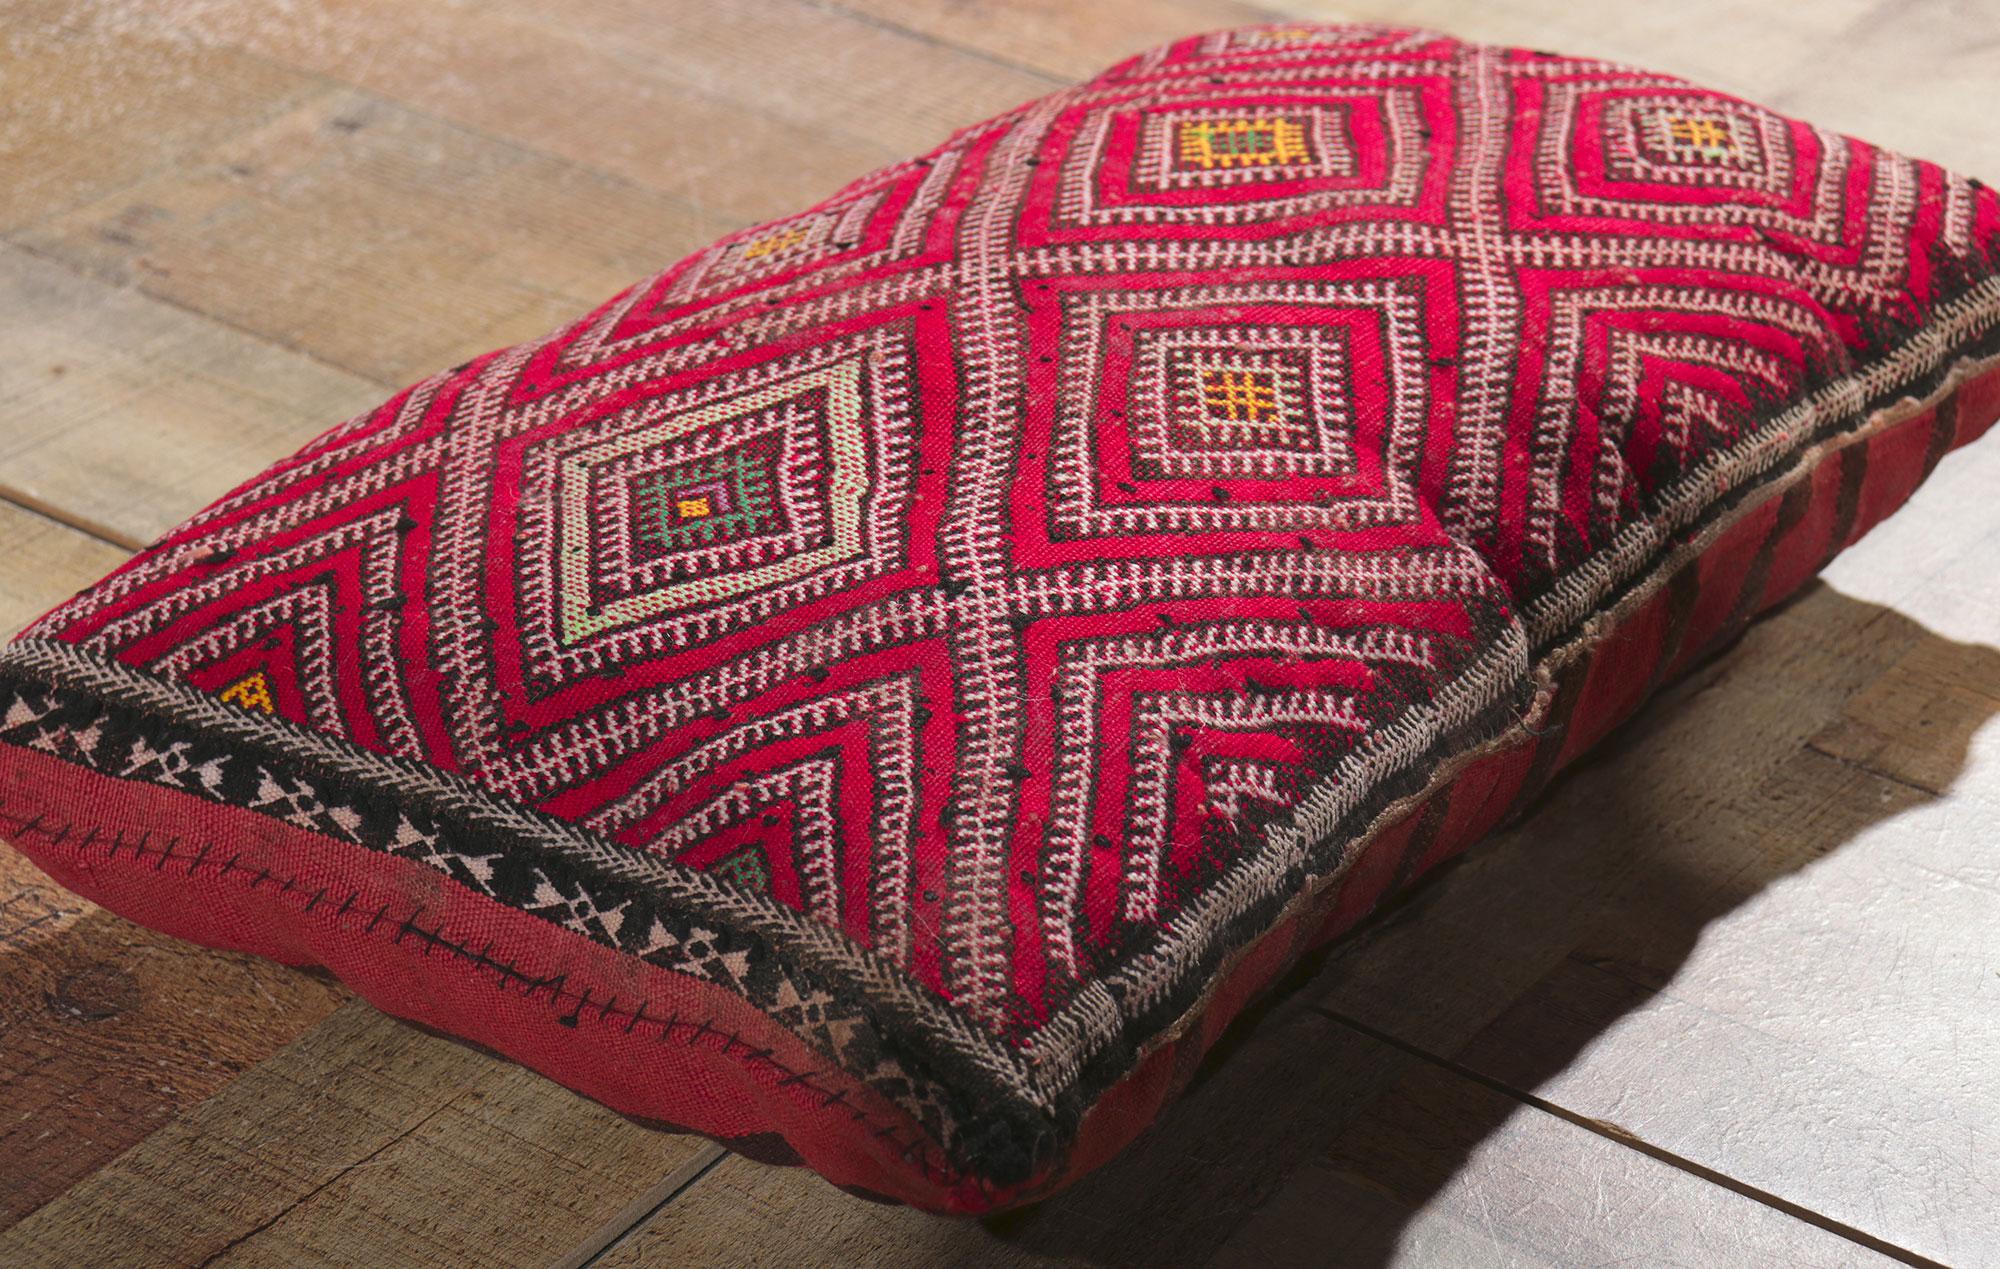 20th Century Vintage Zemmour Moroccan Rug Pillow by Berber Tribes of Morocco For Sale